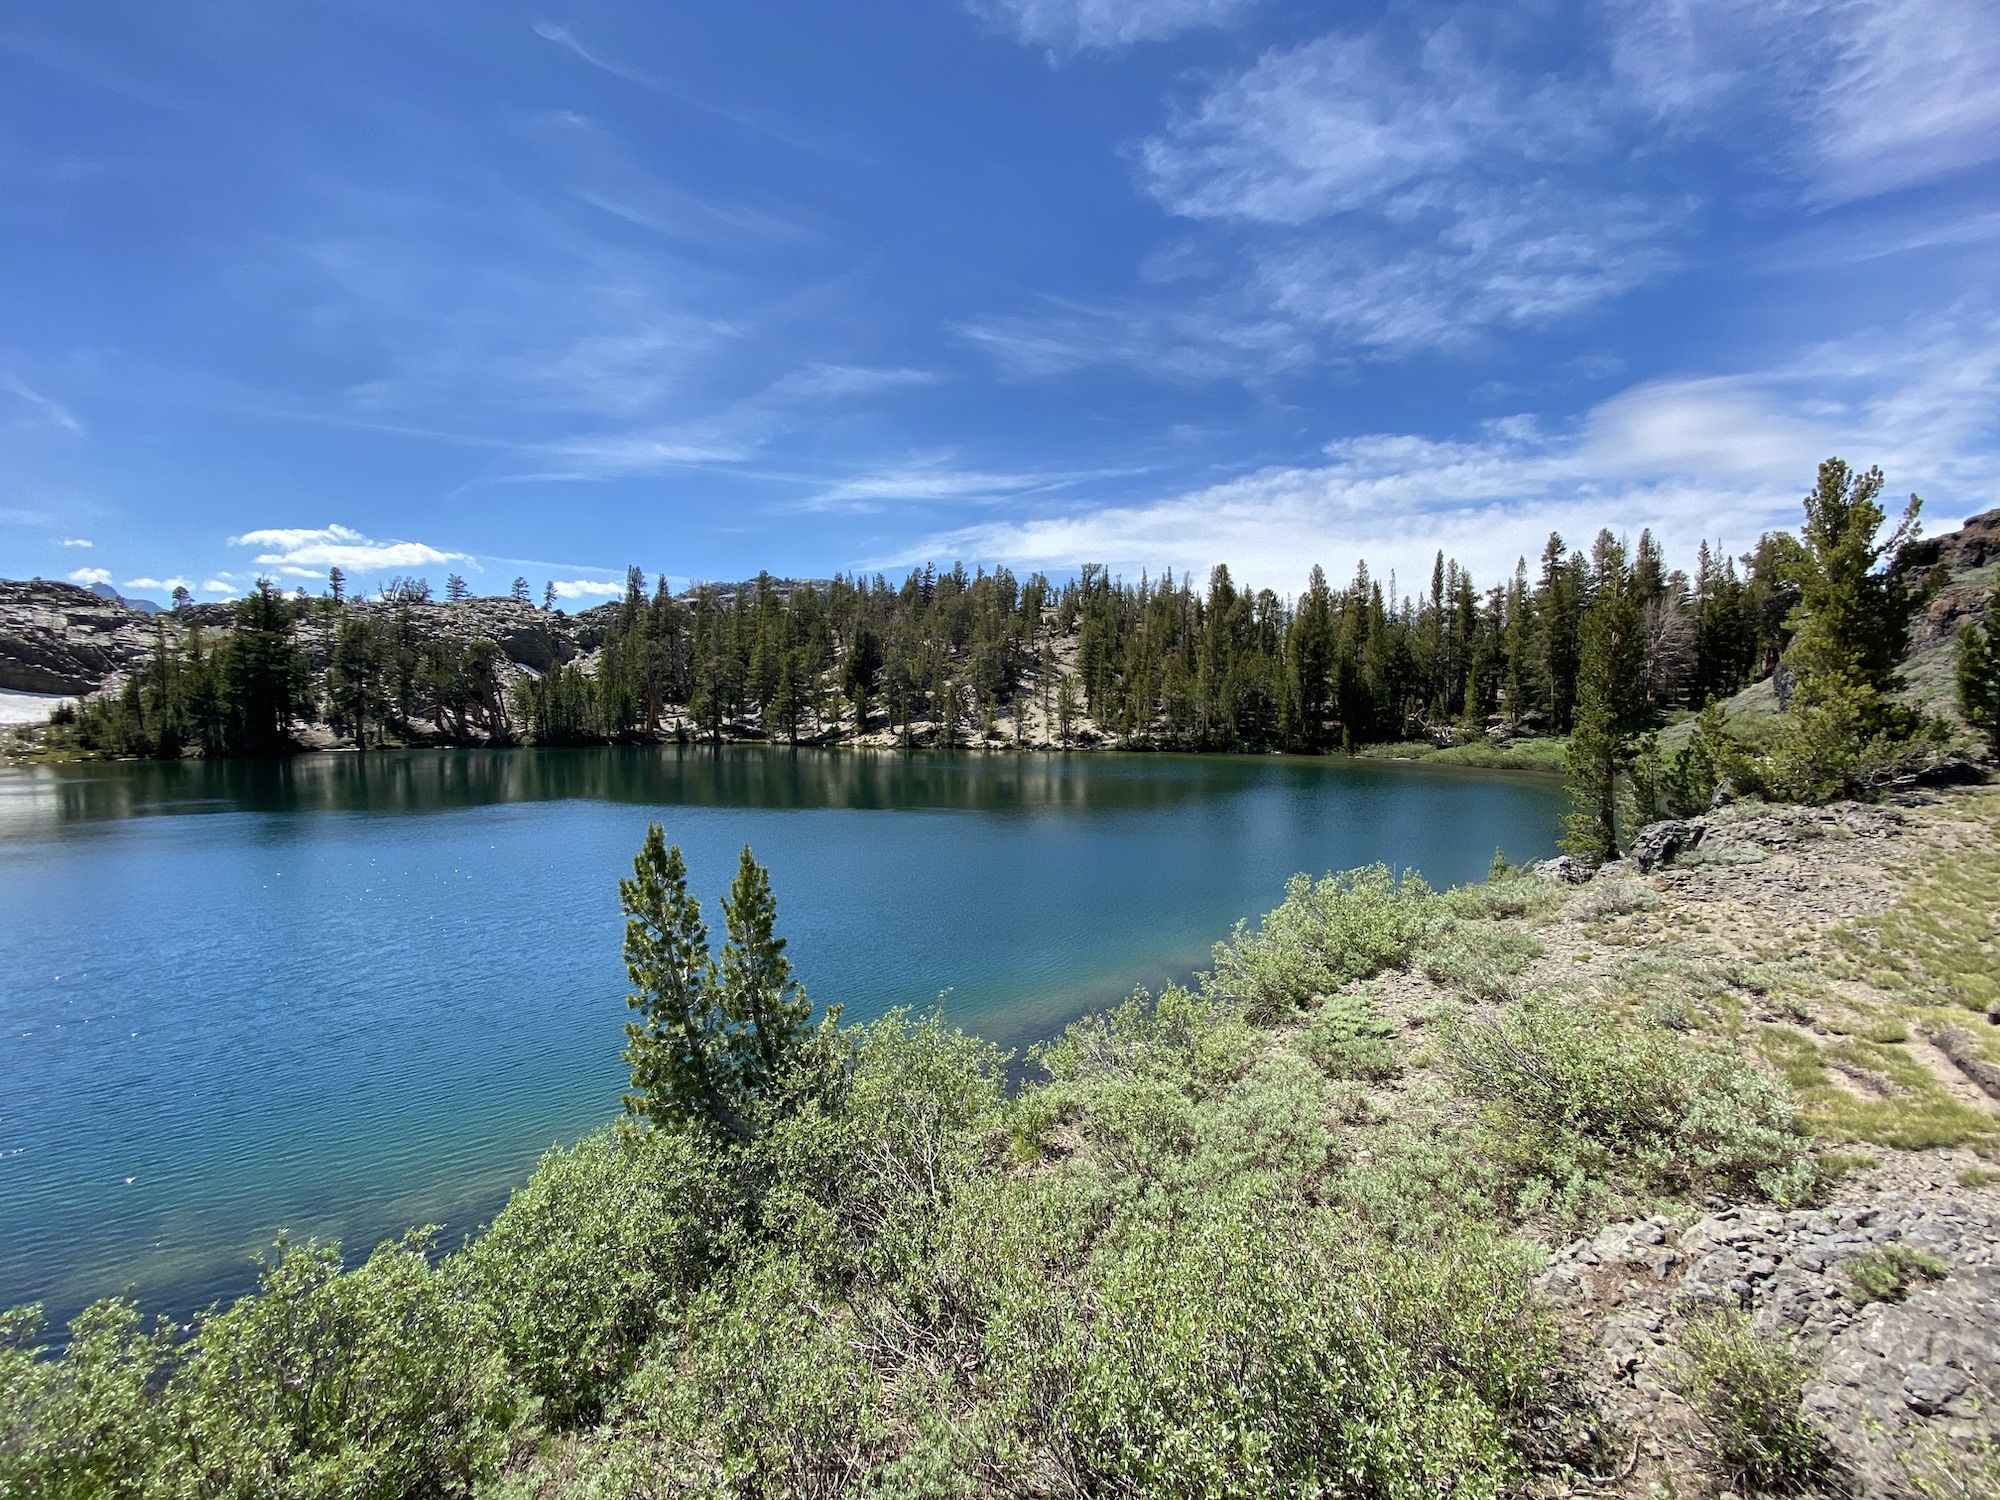 A deep turquoise lake surrounded by trees